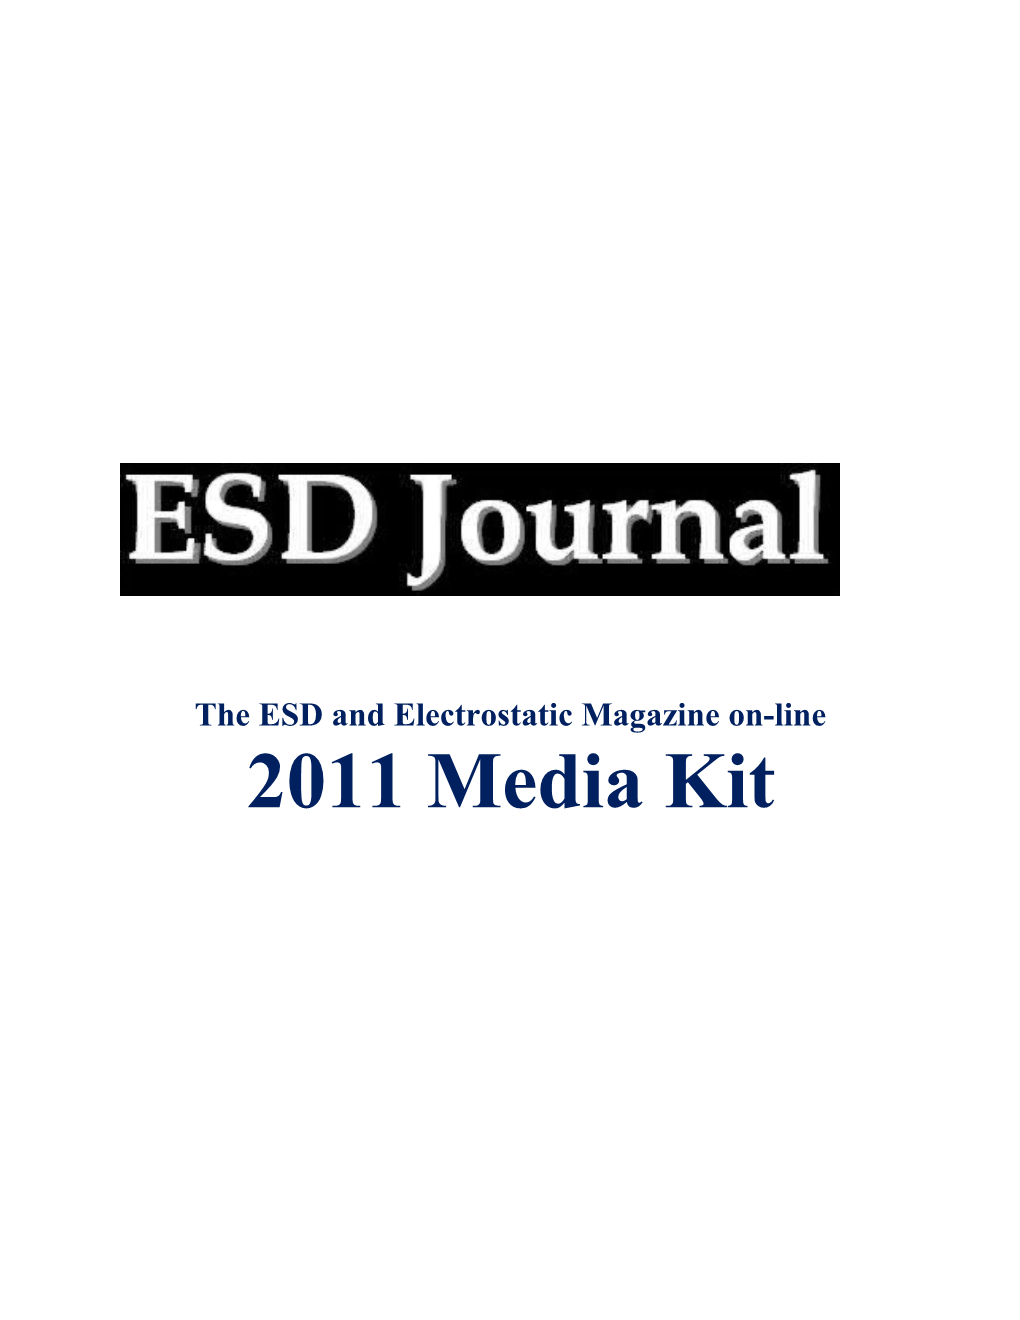 The ESD Journal